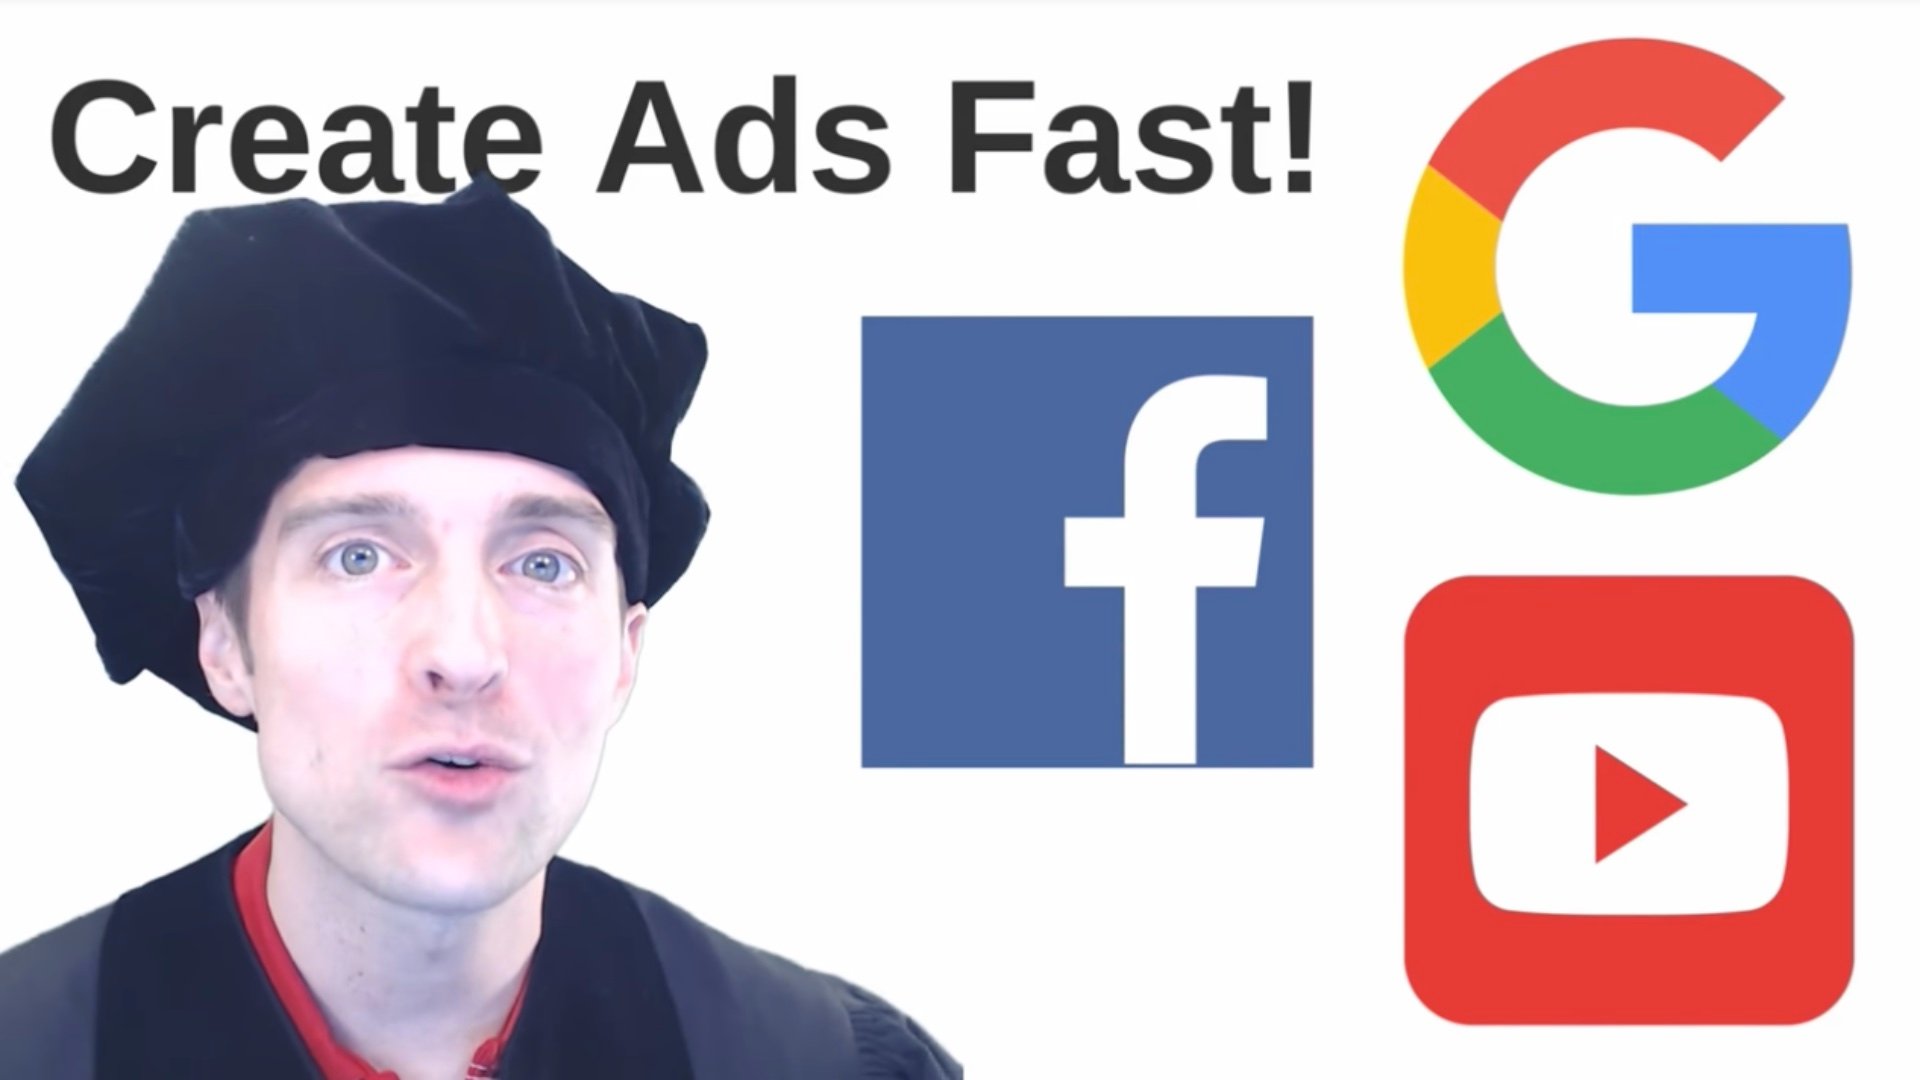 Would you like to see how to make ads on Google and quickly because this is a very valuable skill that you can use to promote your own